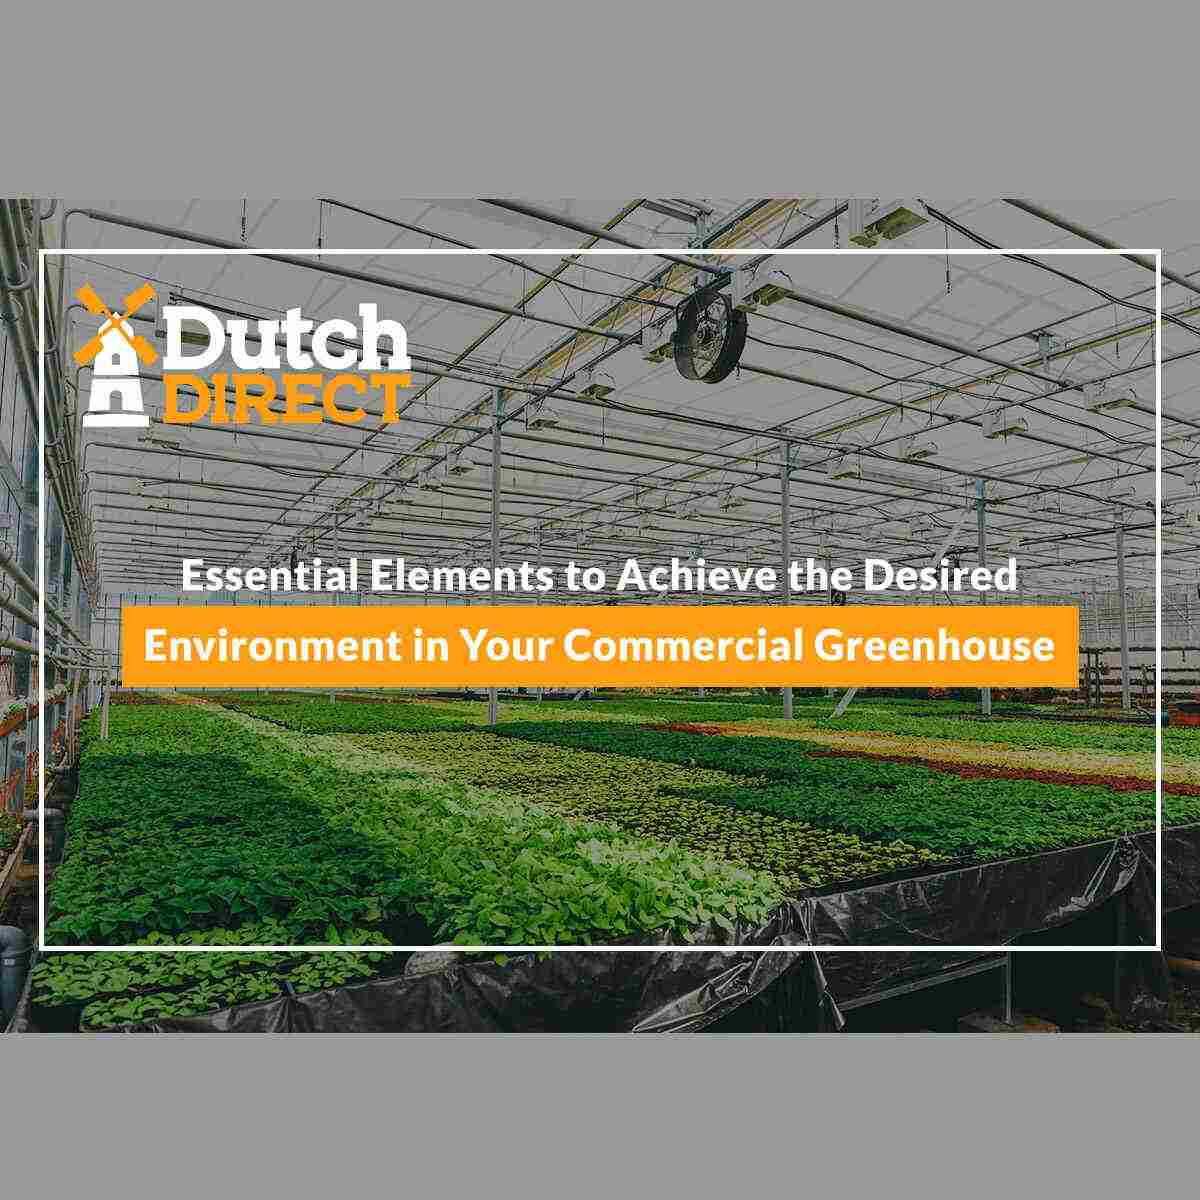 Essential Elements to Achieve the Desired Environment in Your Commercial Greenhouse